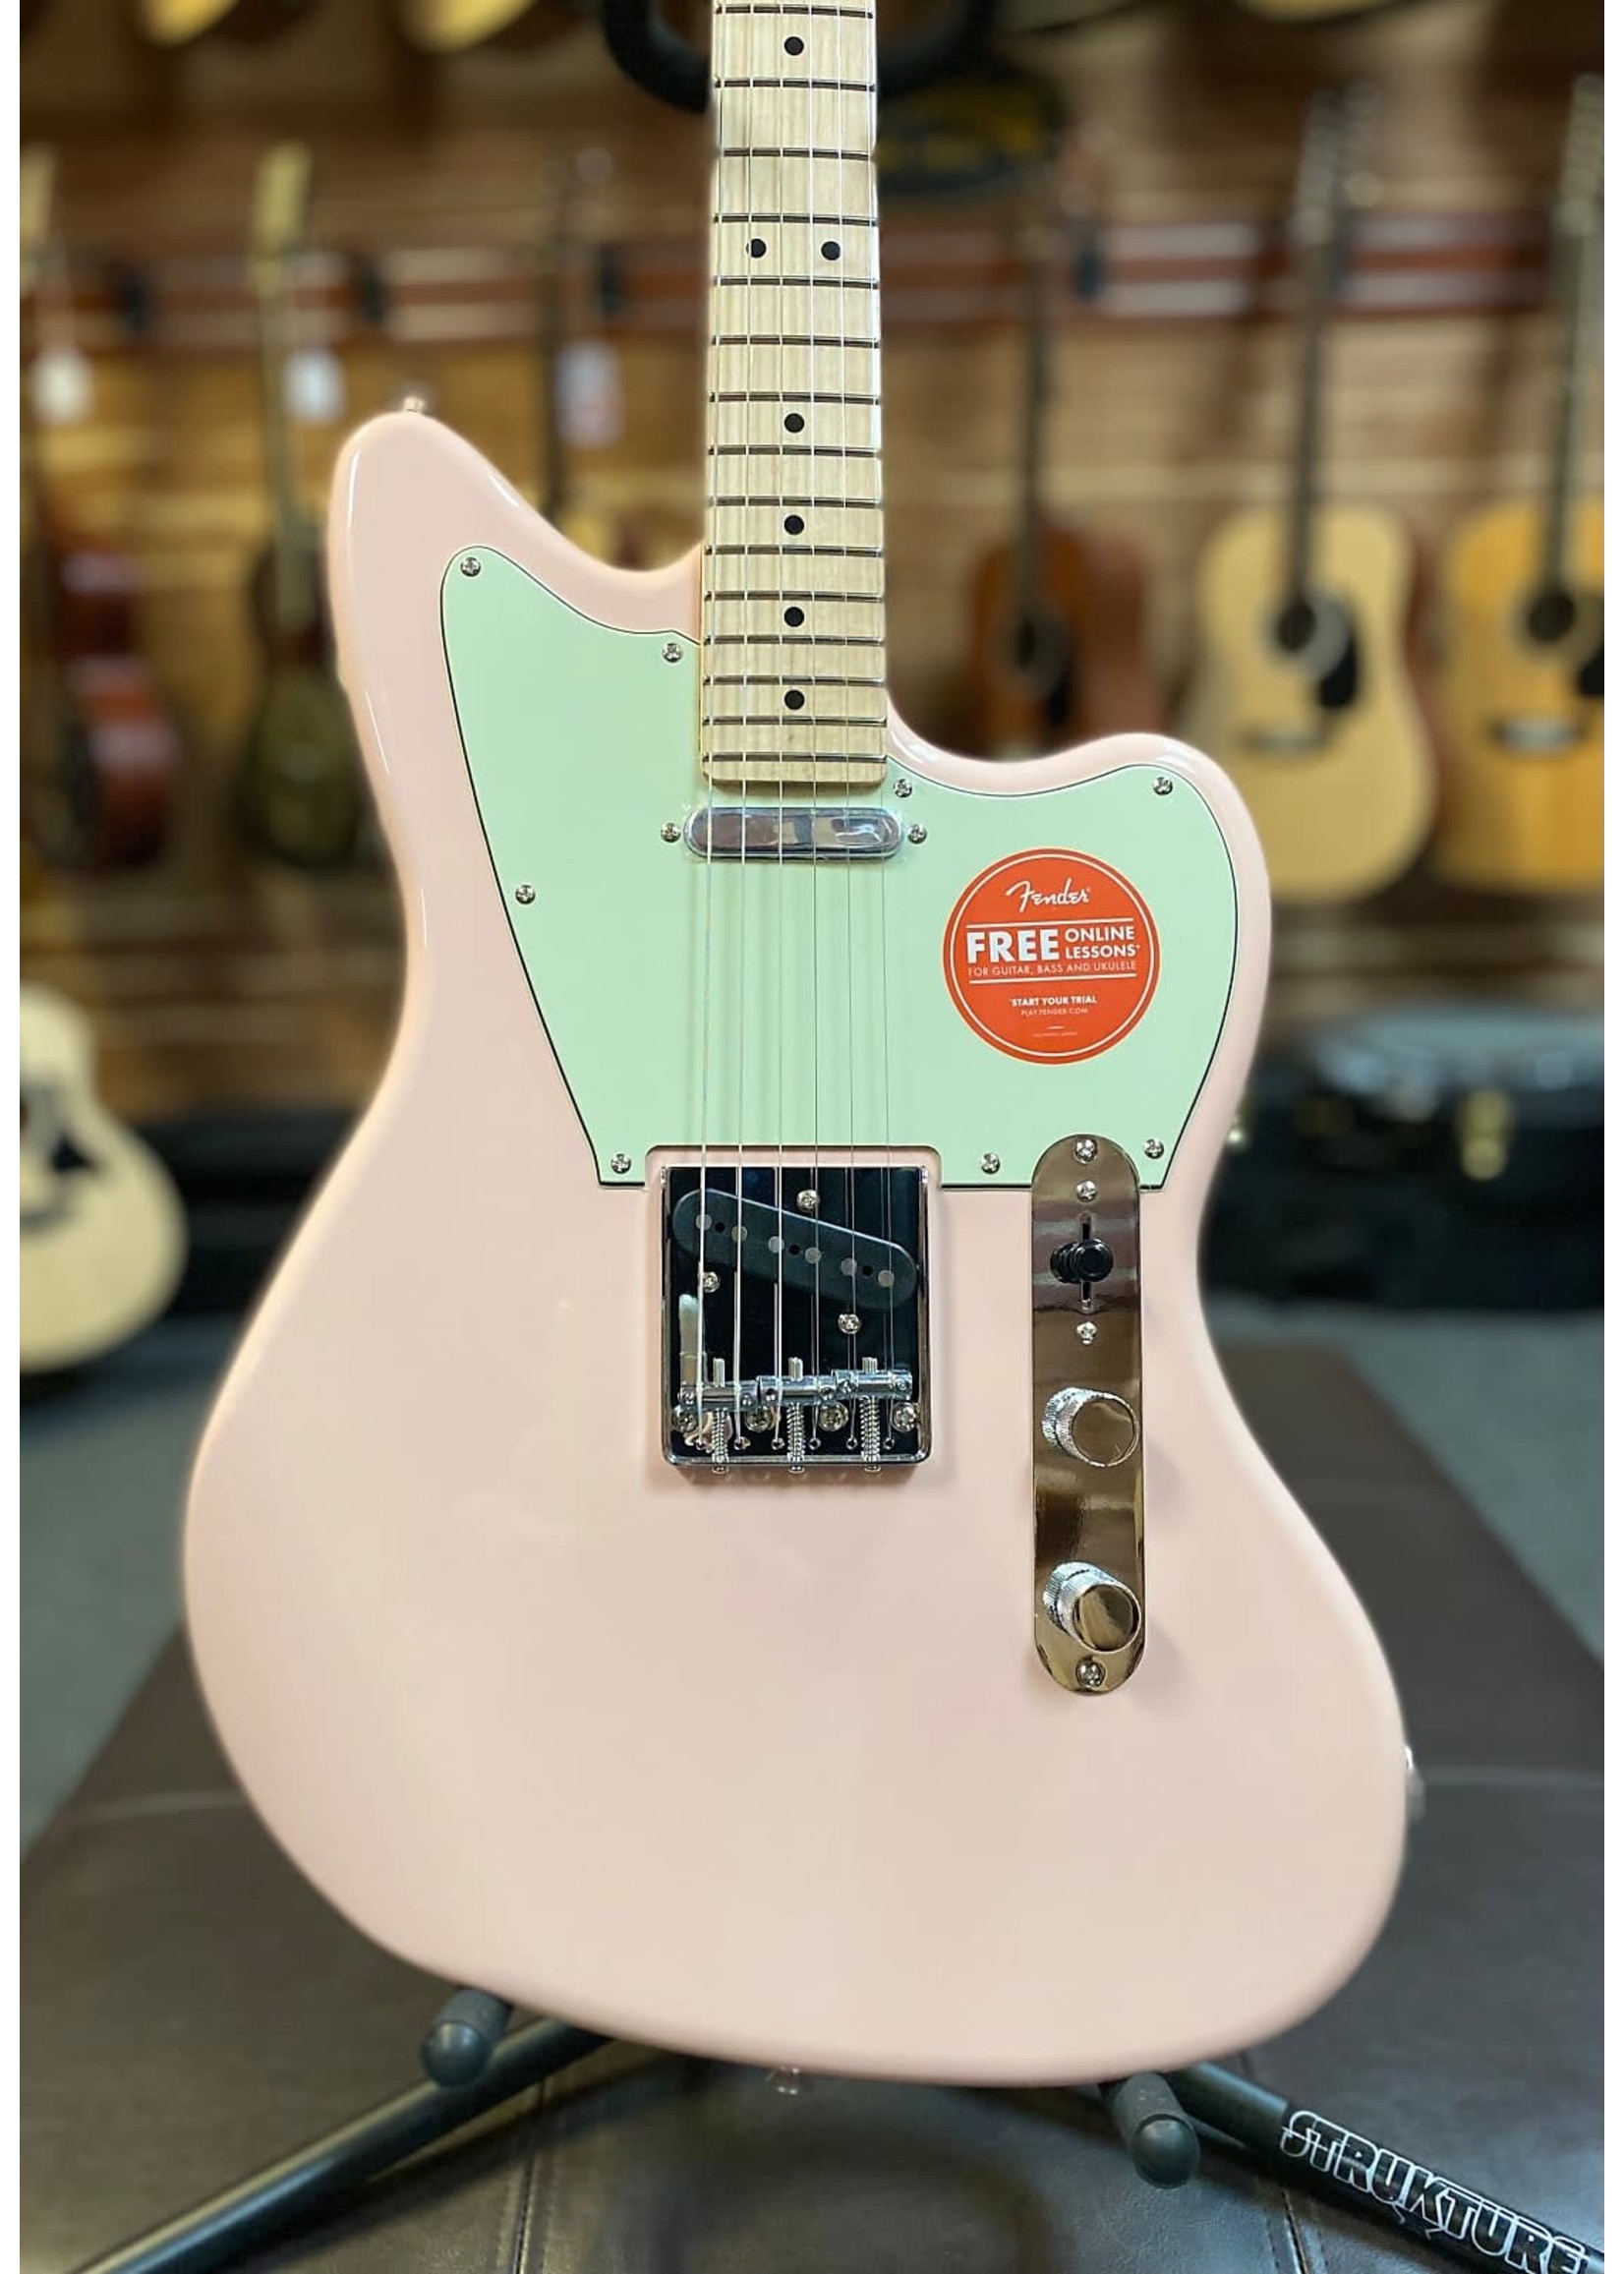 Squier SQUIER PARANORMAL OFFSET TELECASTER ELECTRIC GUITAR MAPLE MINT PICKGUARD IN SHELL PINK